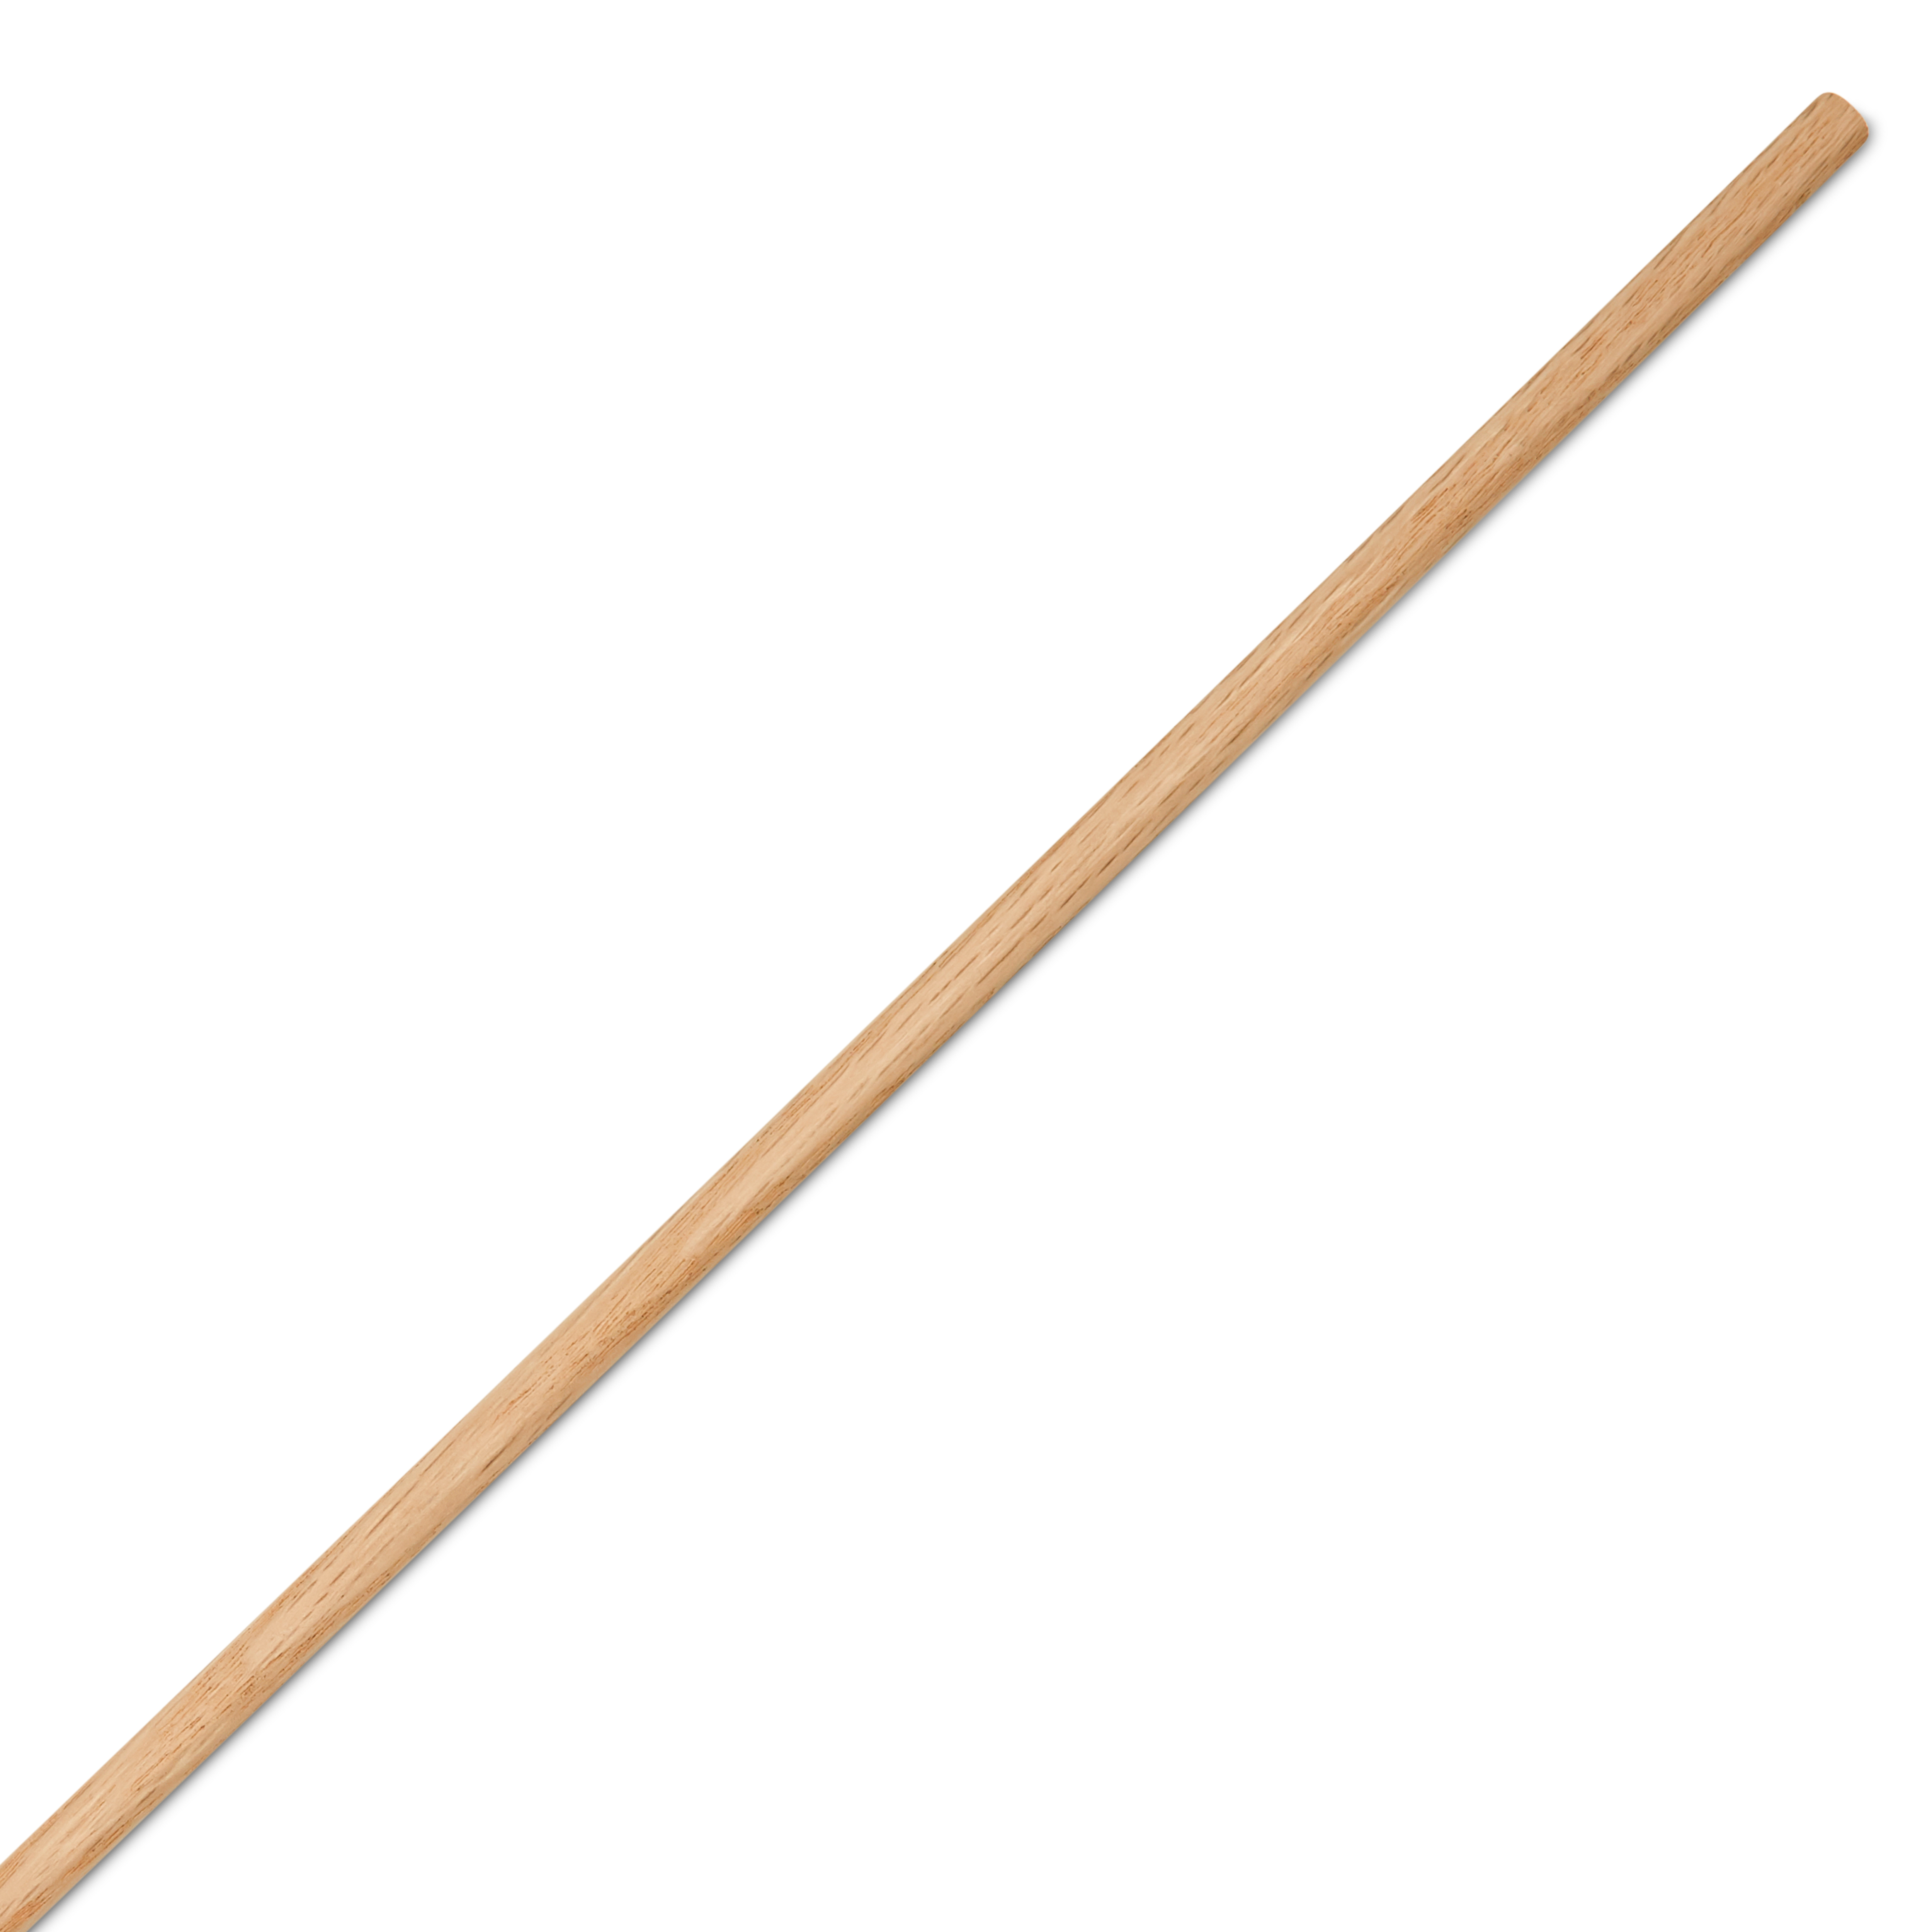 Dowel Rods Wood Sticks Wooden Dowel Rods - 1/4 x 18 Inch Unfinished  Hardwood Sticks - for Crafts and DIYers - 50 Pieces by Woodpeckers